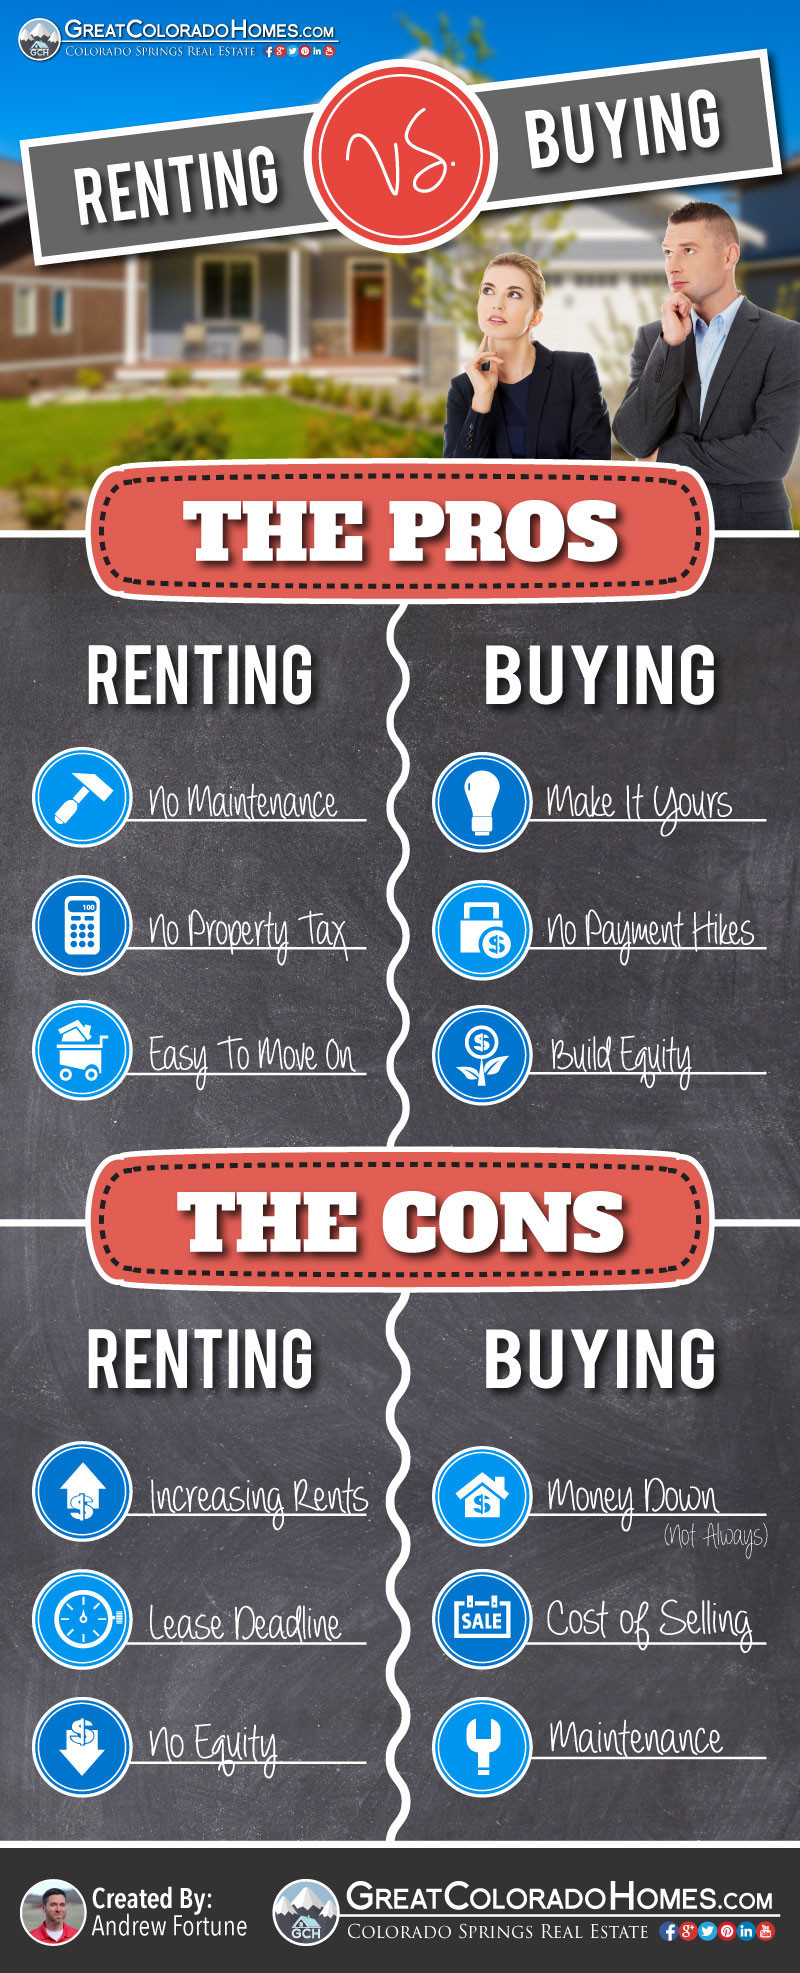 The Pros & Cons of Renting Versus Buying a Home